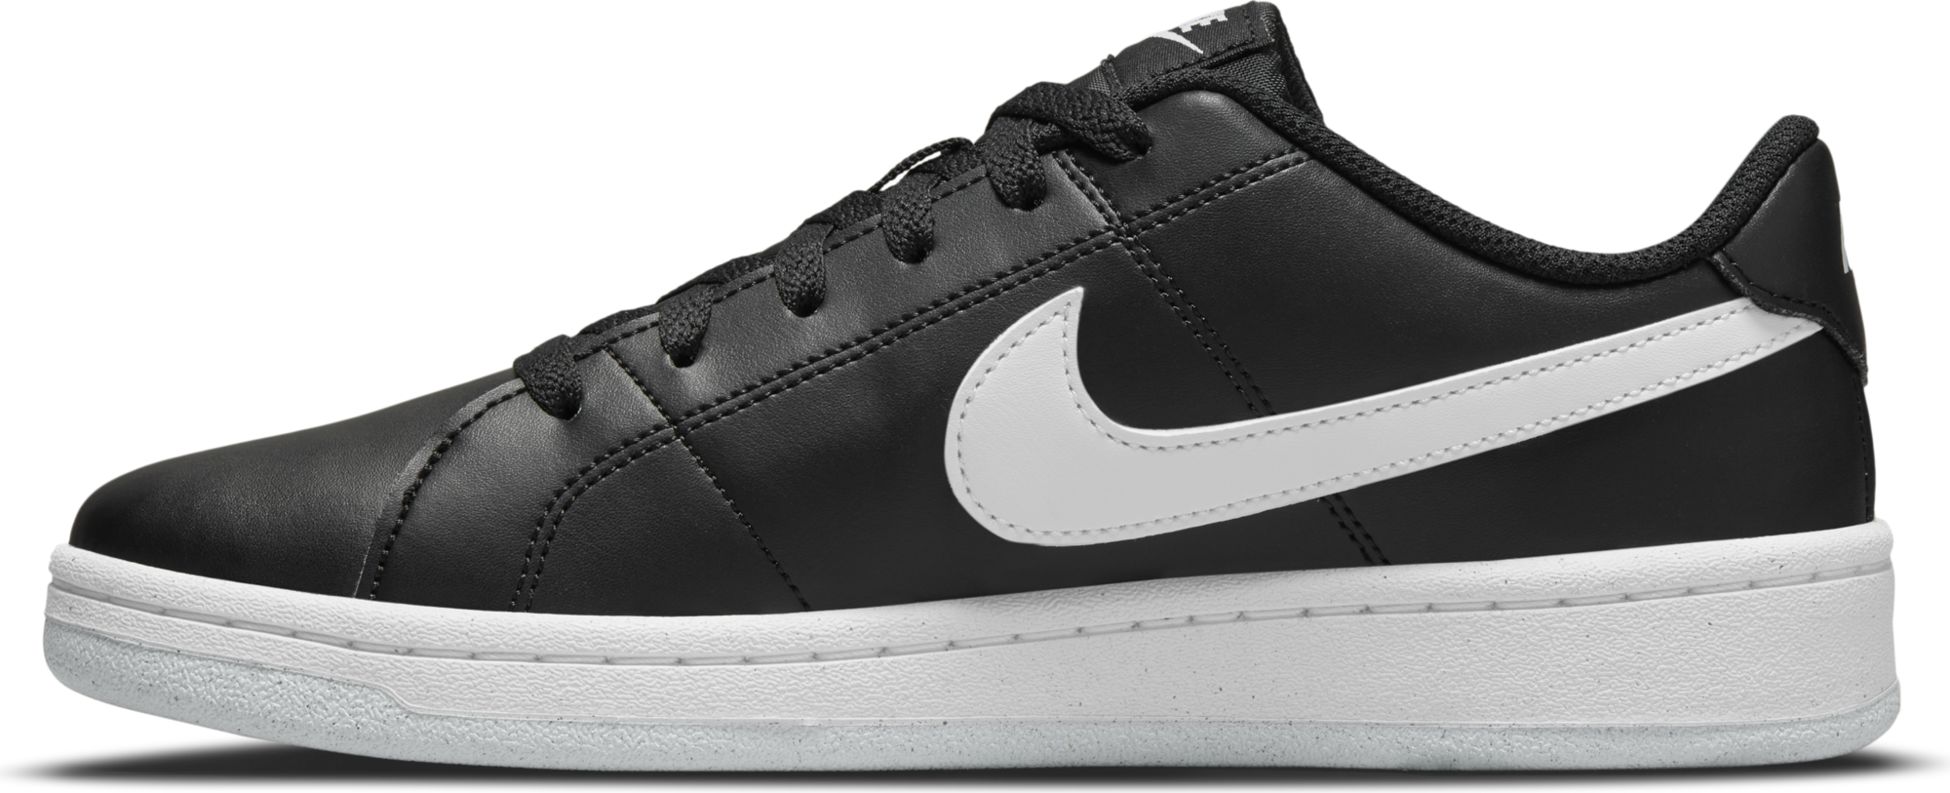 NIKE, W COURT ROYALE 2 BETTER ESSENTIAL